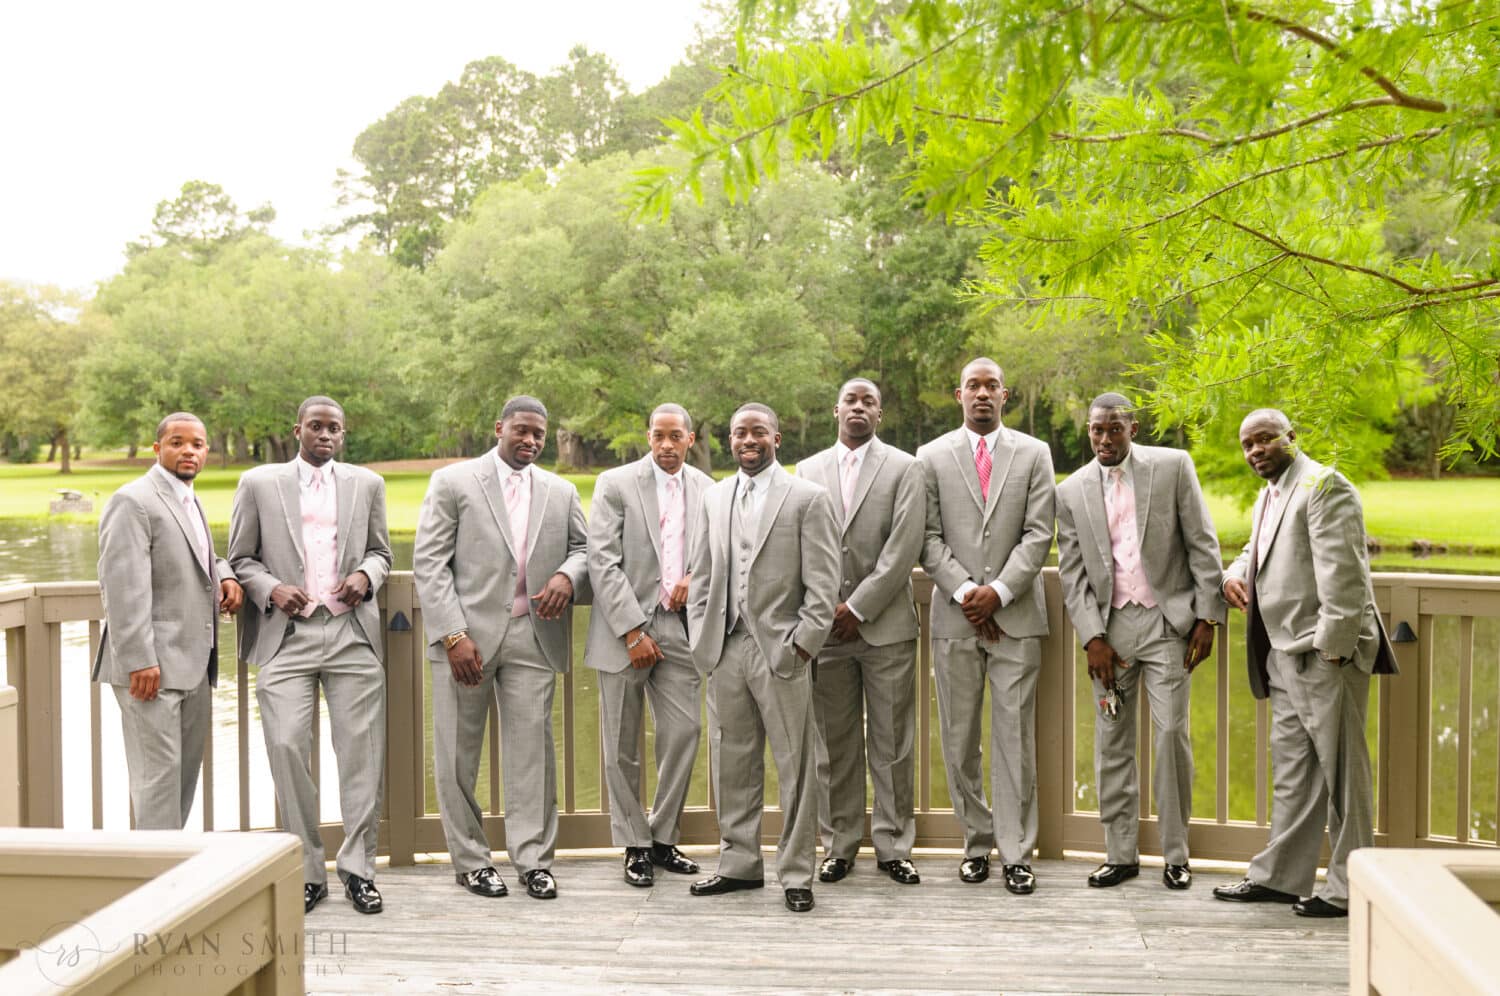 Pictures with the groomsmen before the ceremony - Brookgreen Gardens, Murrells Inlet, SC